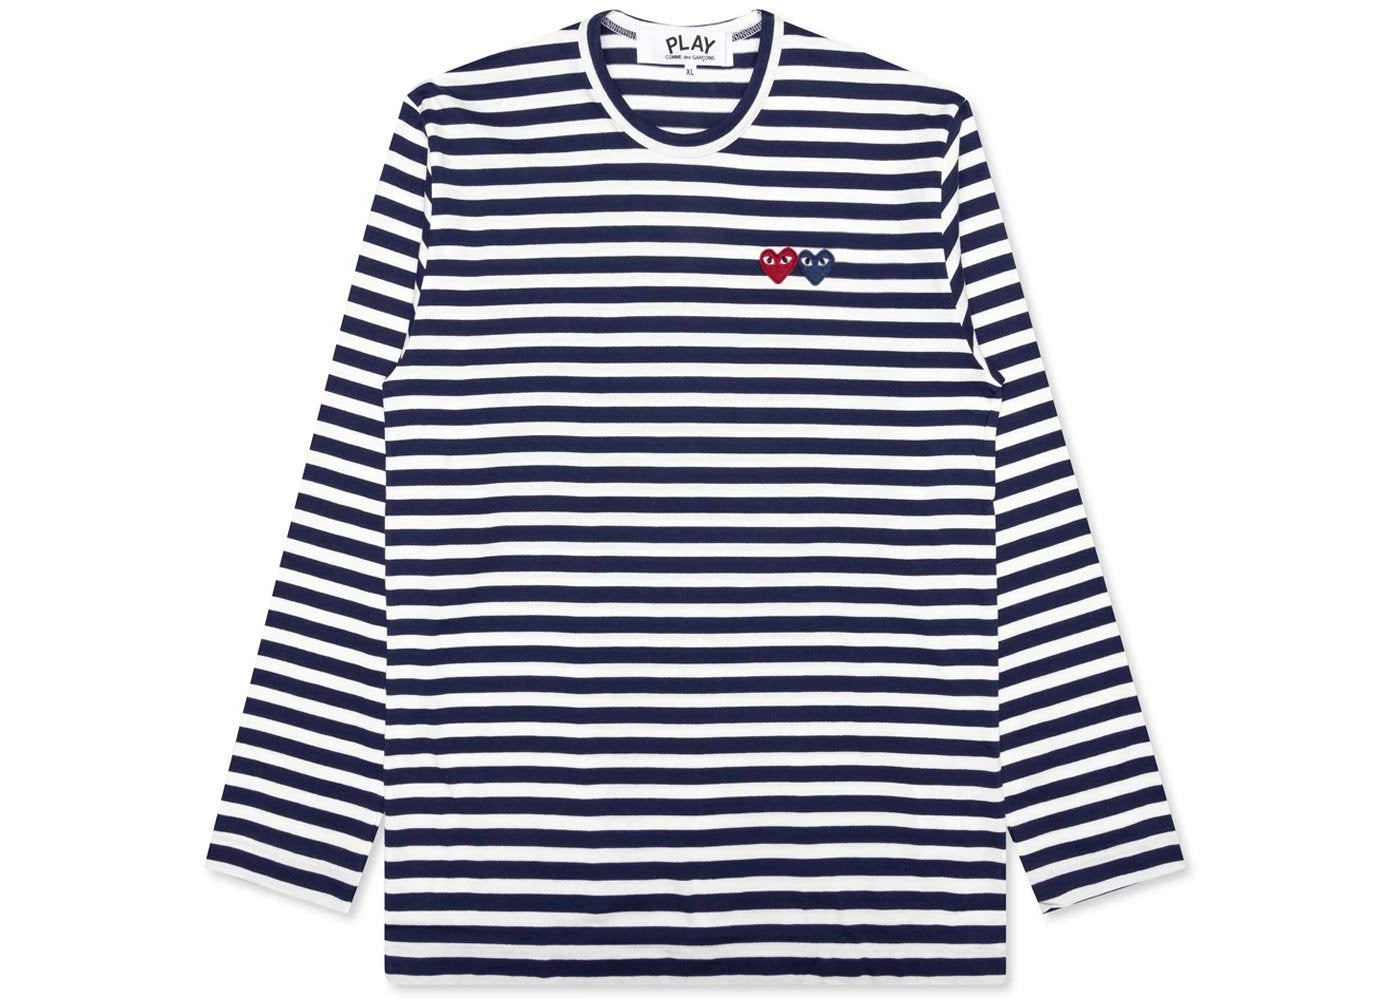 COMME DES GARÇONS PLAY DOUBLE HEART STRIPED LONG SLEEVE NAVY / WHITE